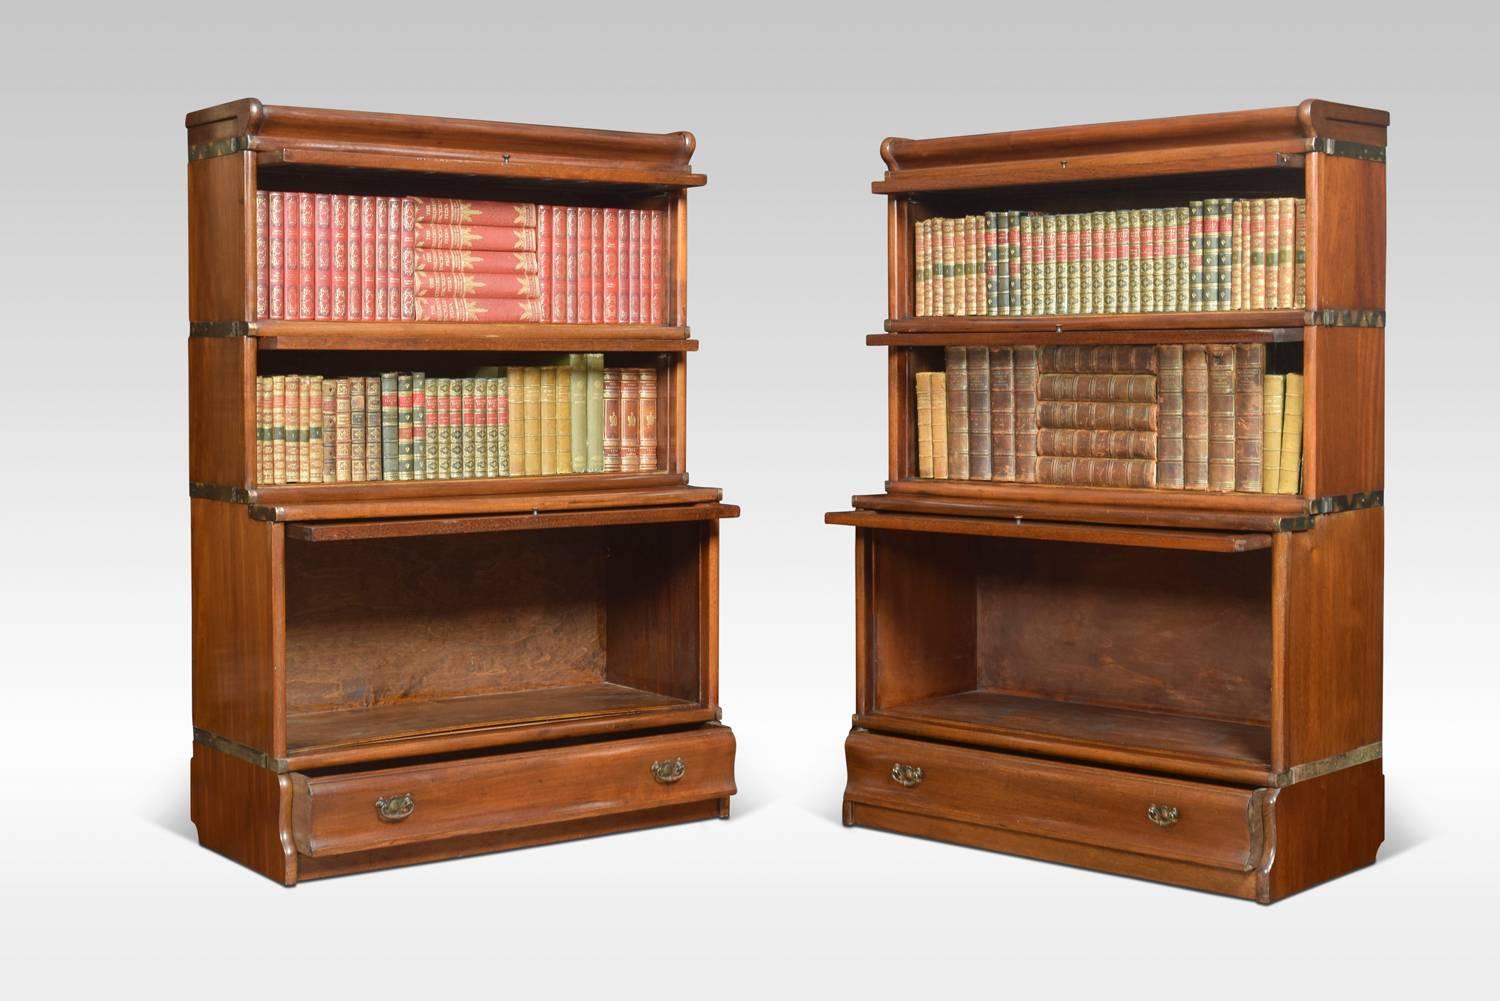 Pair of mahogany globe Wernicke bookcases, the moulded top above two-section with glazed doors and panelled mahogany door below, raised up on a plinth base with single long draw.

Dimensions
Height 48.5 inches
Width 34.5 inches
Depth 15 inches.